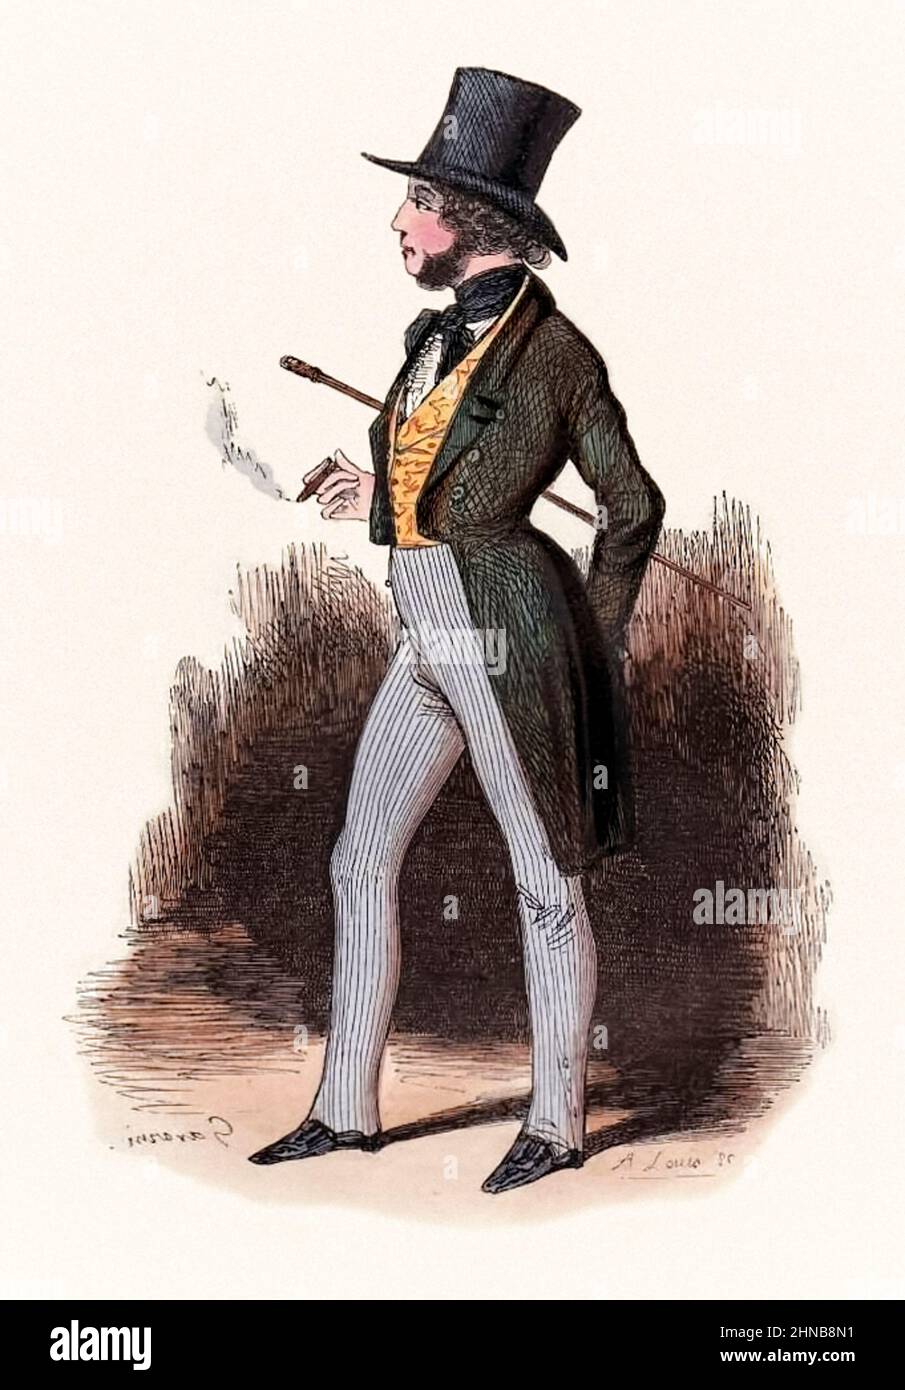 Illustration from ‘Le Sportsman Parisien’ [The Parisian Sportsman] by Rodolphe d'Ornano (1861-1865) by Paul Gavarni (1804-1866). Photograph of an original hand coloured engraving published in 1840. Stock Photo